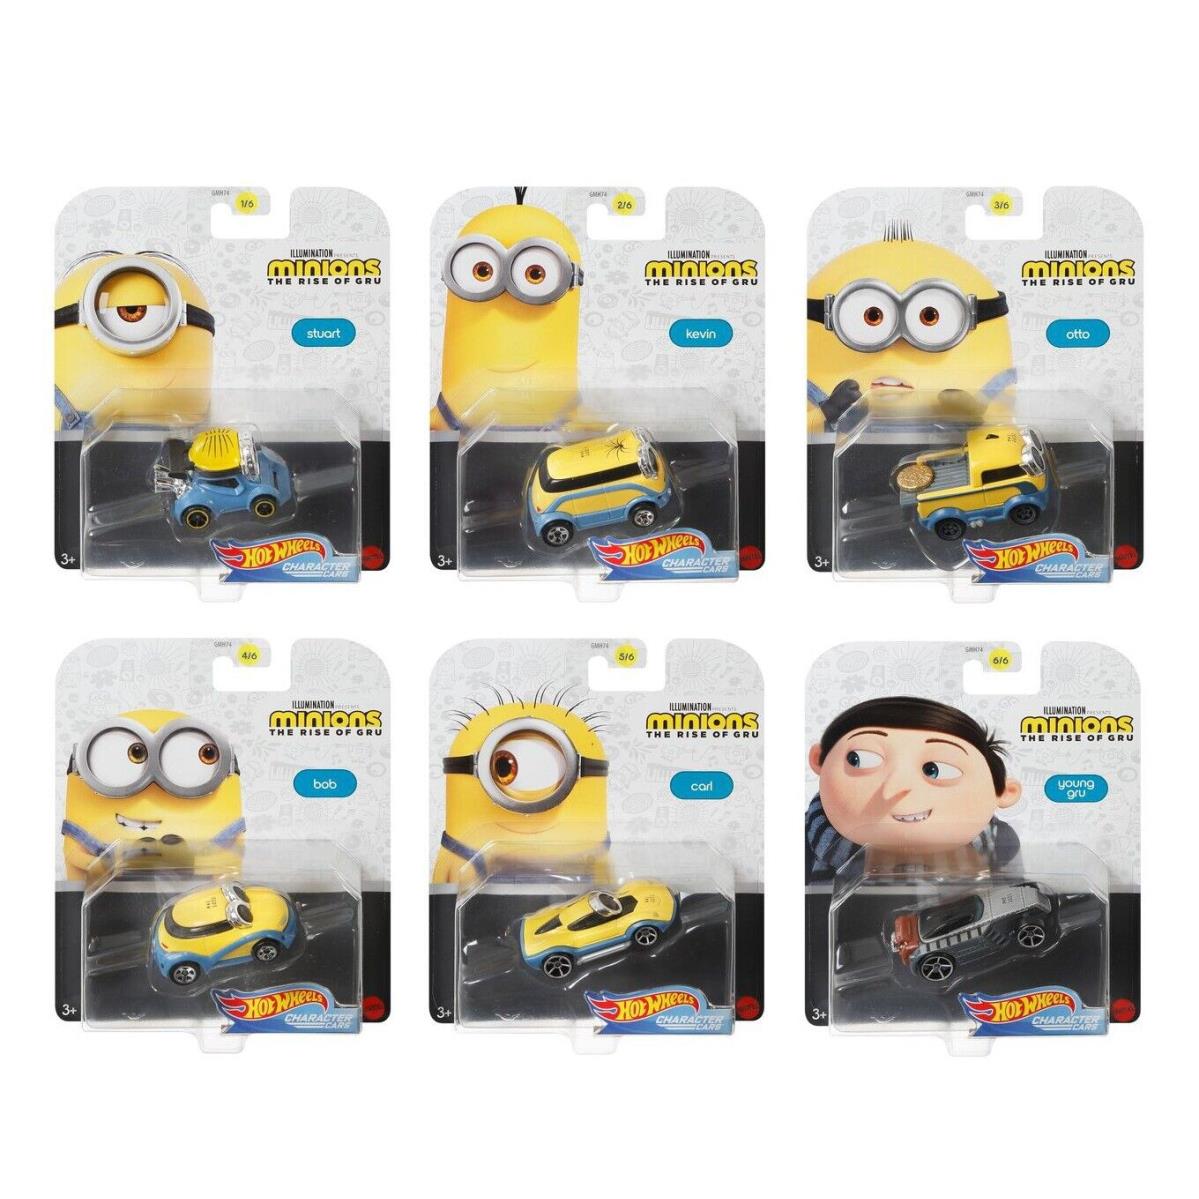 Hot Wheels 2020 Minions The Rise of Gru Set of 6 Character Car 1/64 Diecast